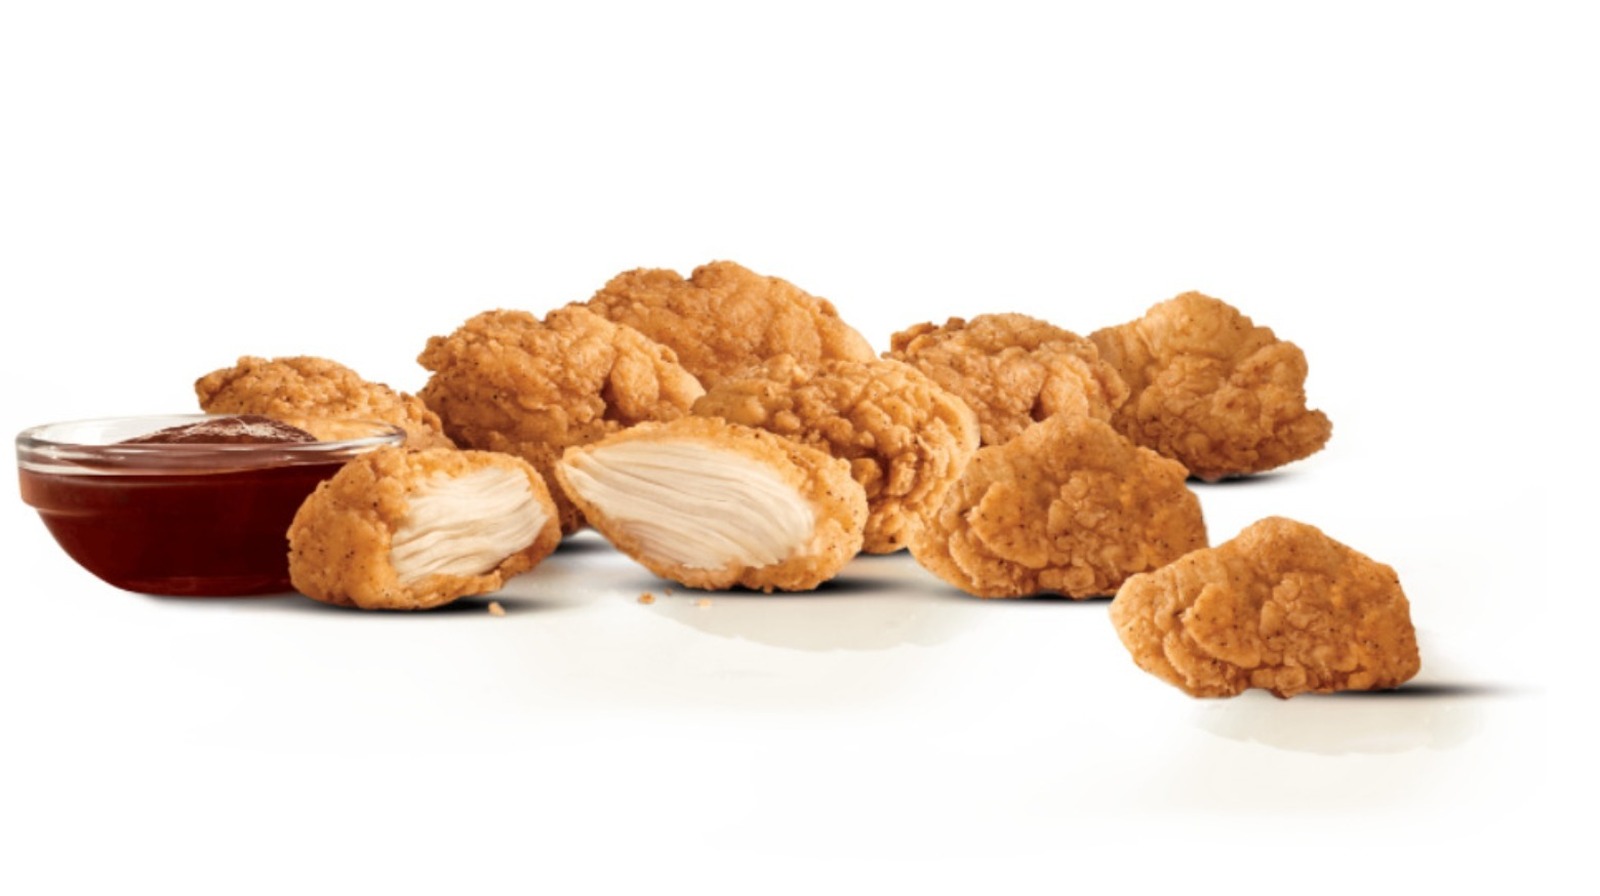 Arby's Just Upgraded Its Value Menu With These New Chicken Nuggets